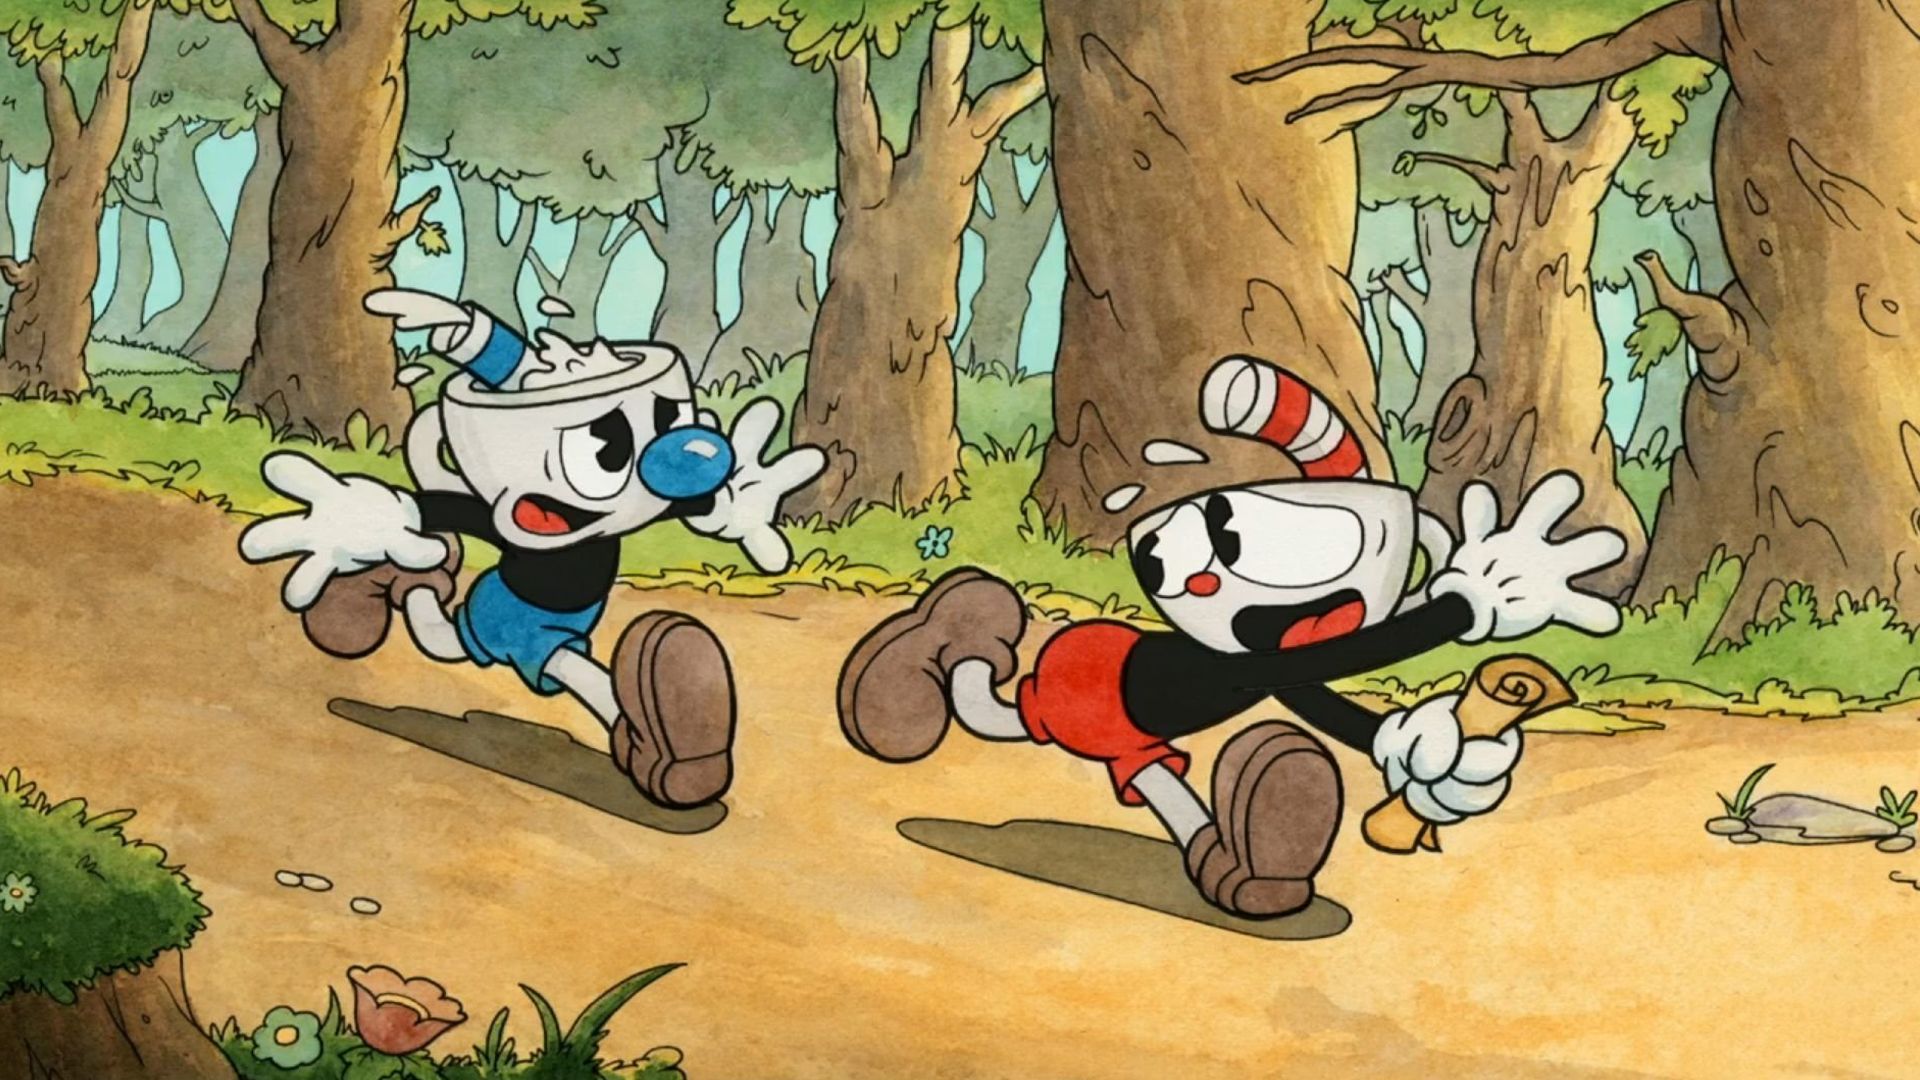 Cuphead physical edition